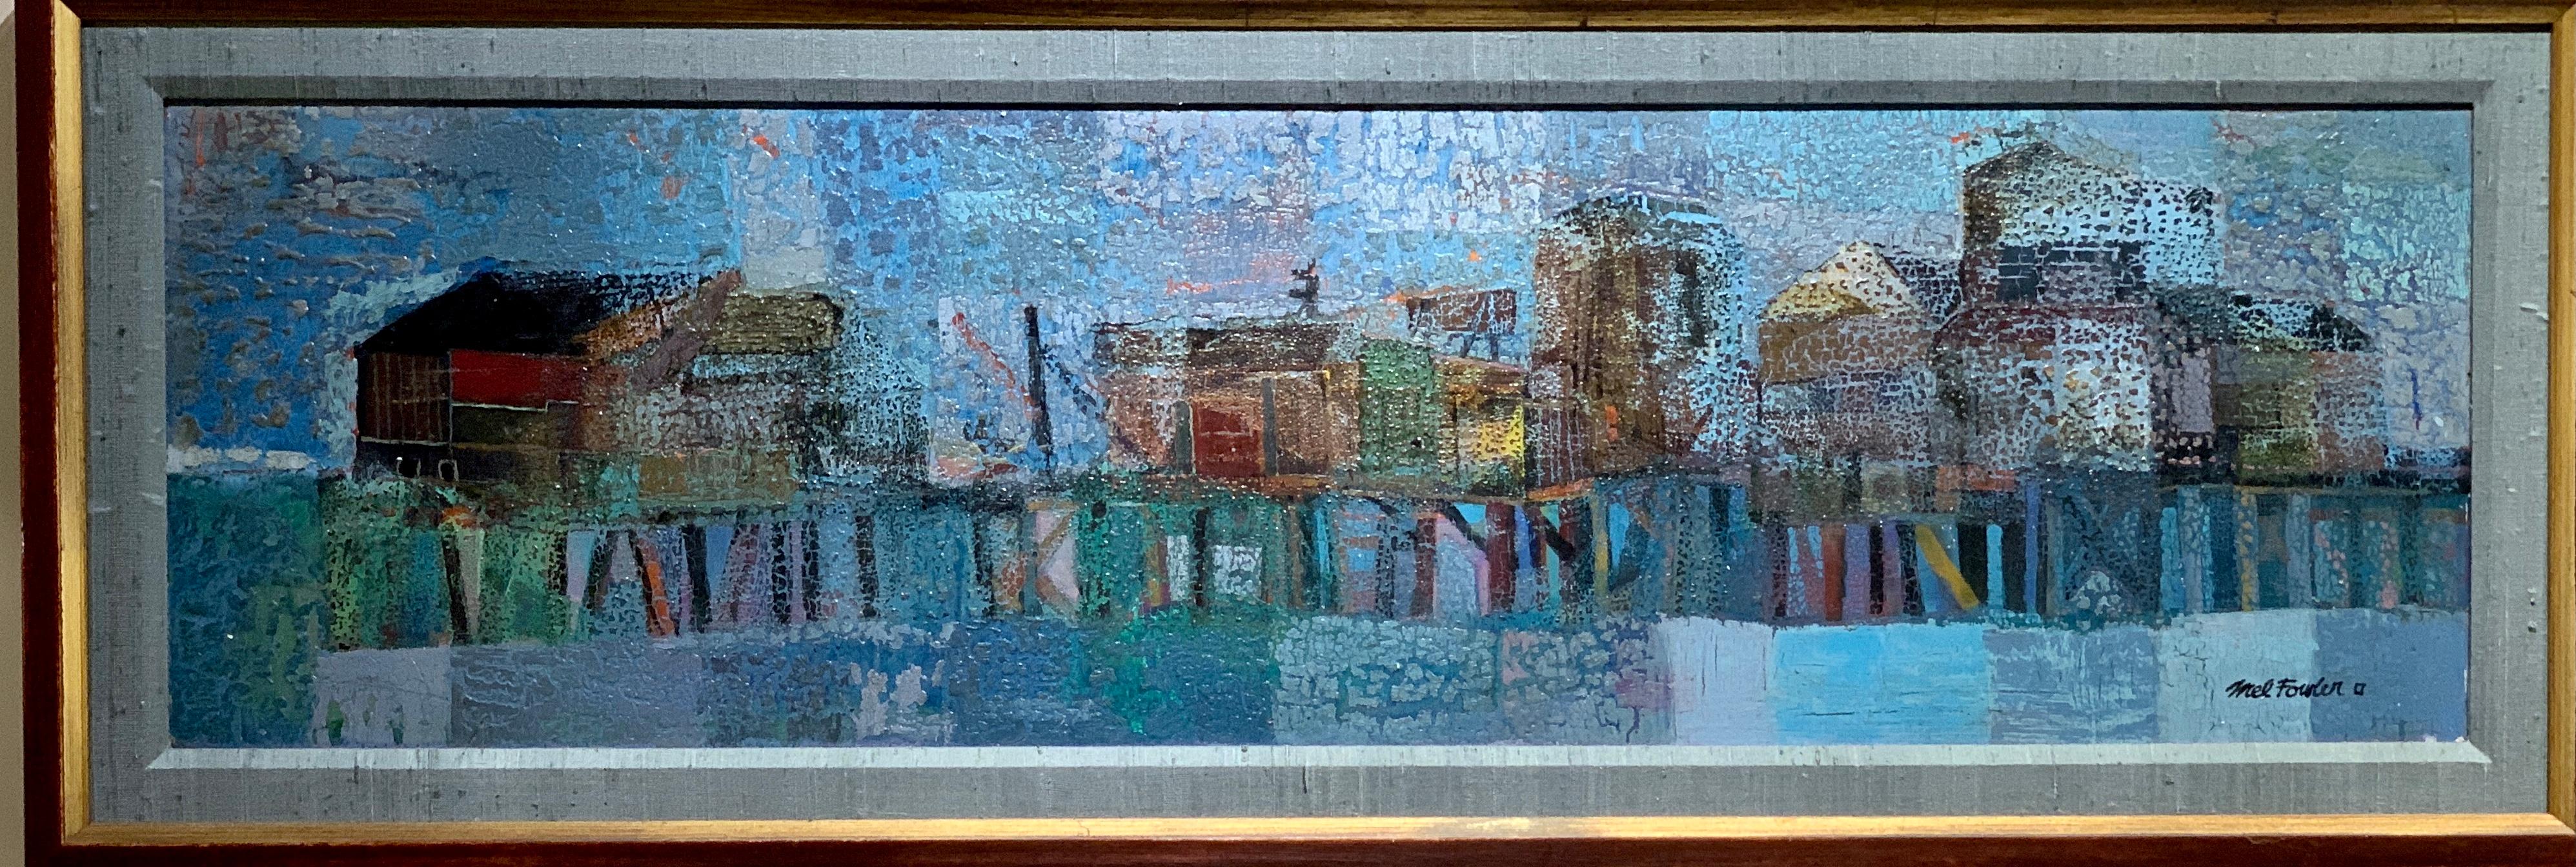 Mel Fowler Abstract Painting - Mid Century American Abstract,  possibly Fisherman's wharf San Francisco, Ca